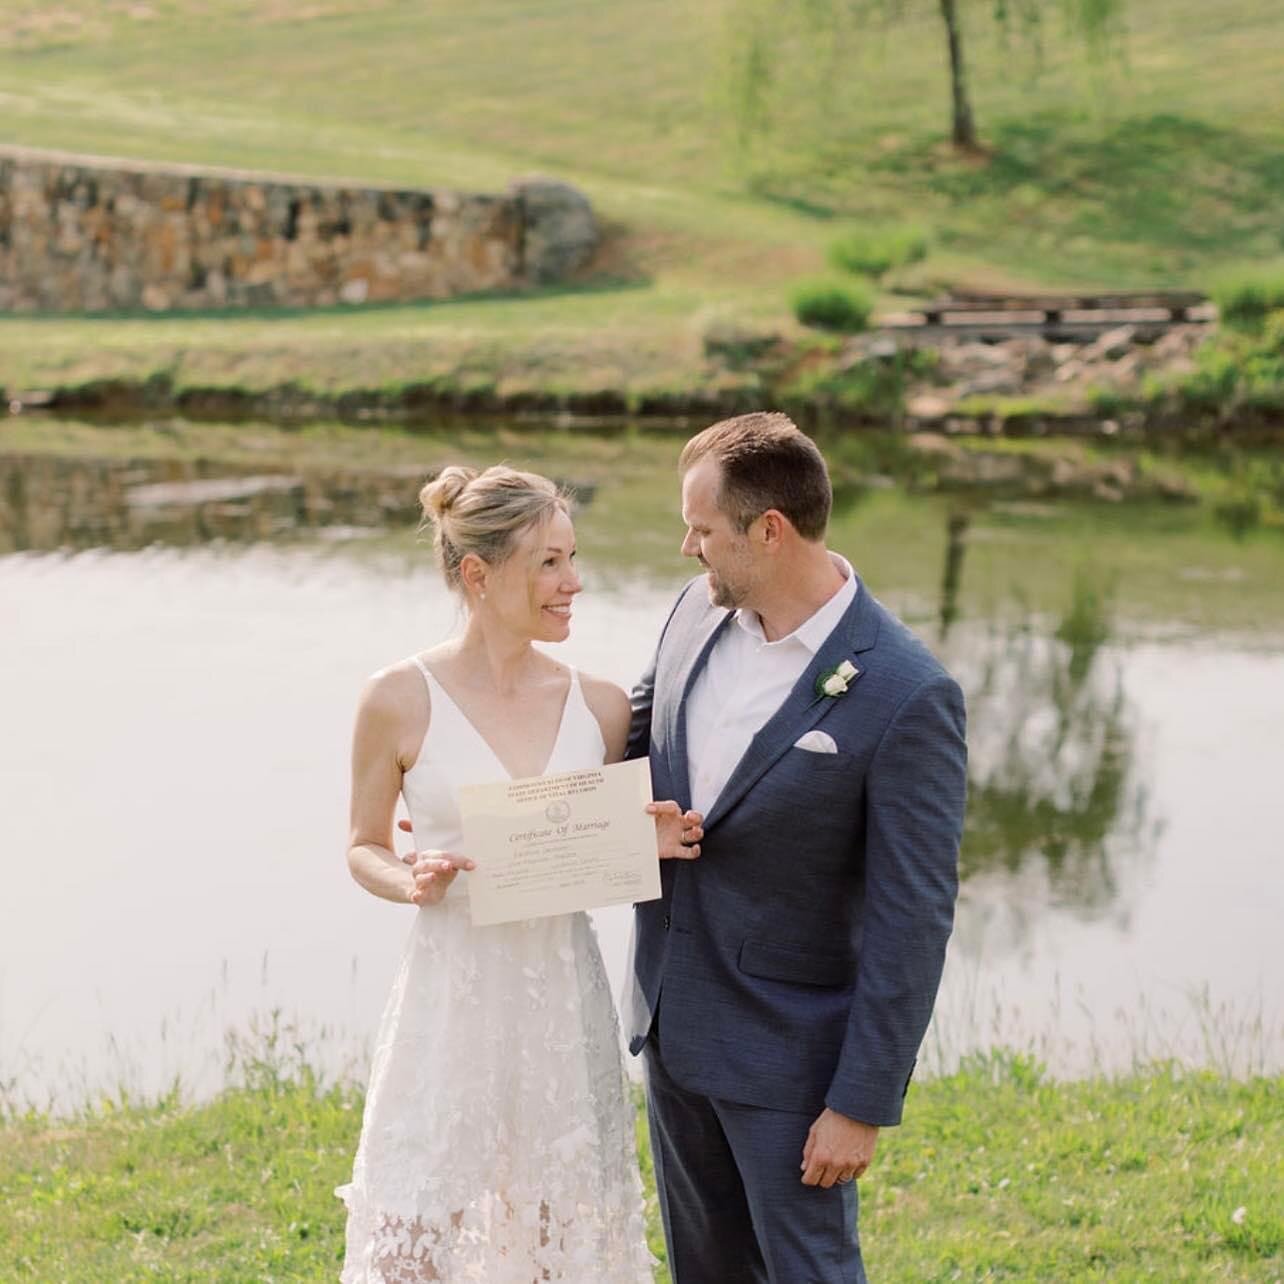 K + C have been together for 9 years and decided to make it a marriage kinda thing. 💍 We celebrated with @stonetowerwinery wine before a sweet ceremony, read by the bride&rsquo;s son, down at the pond. It was so touching!